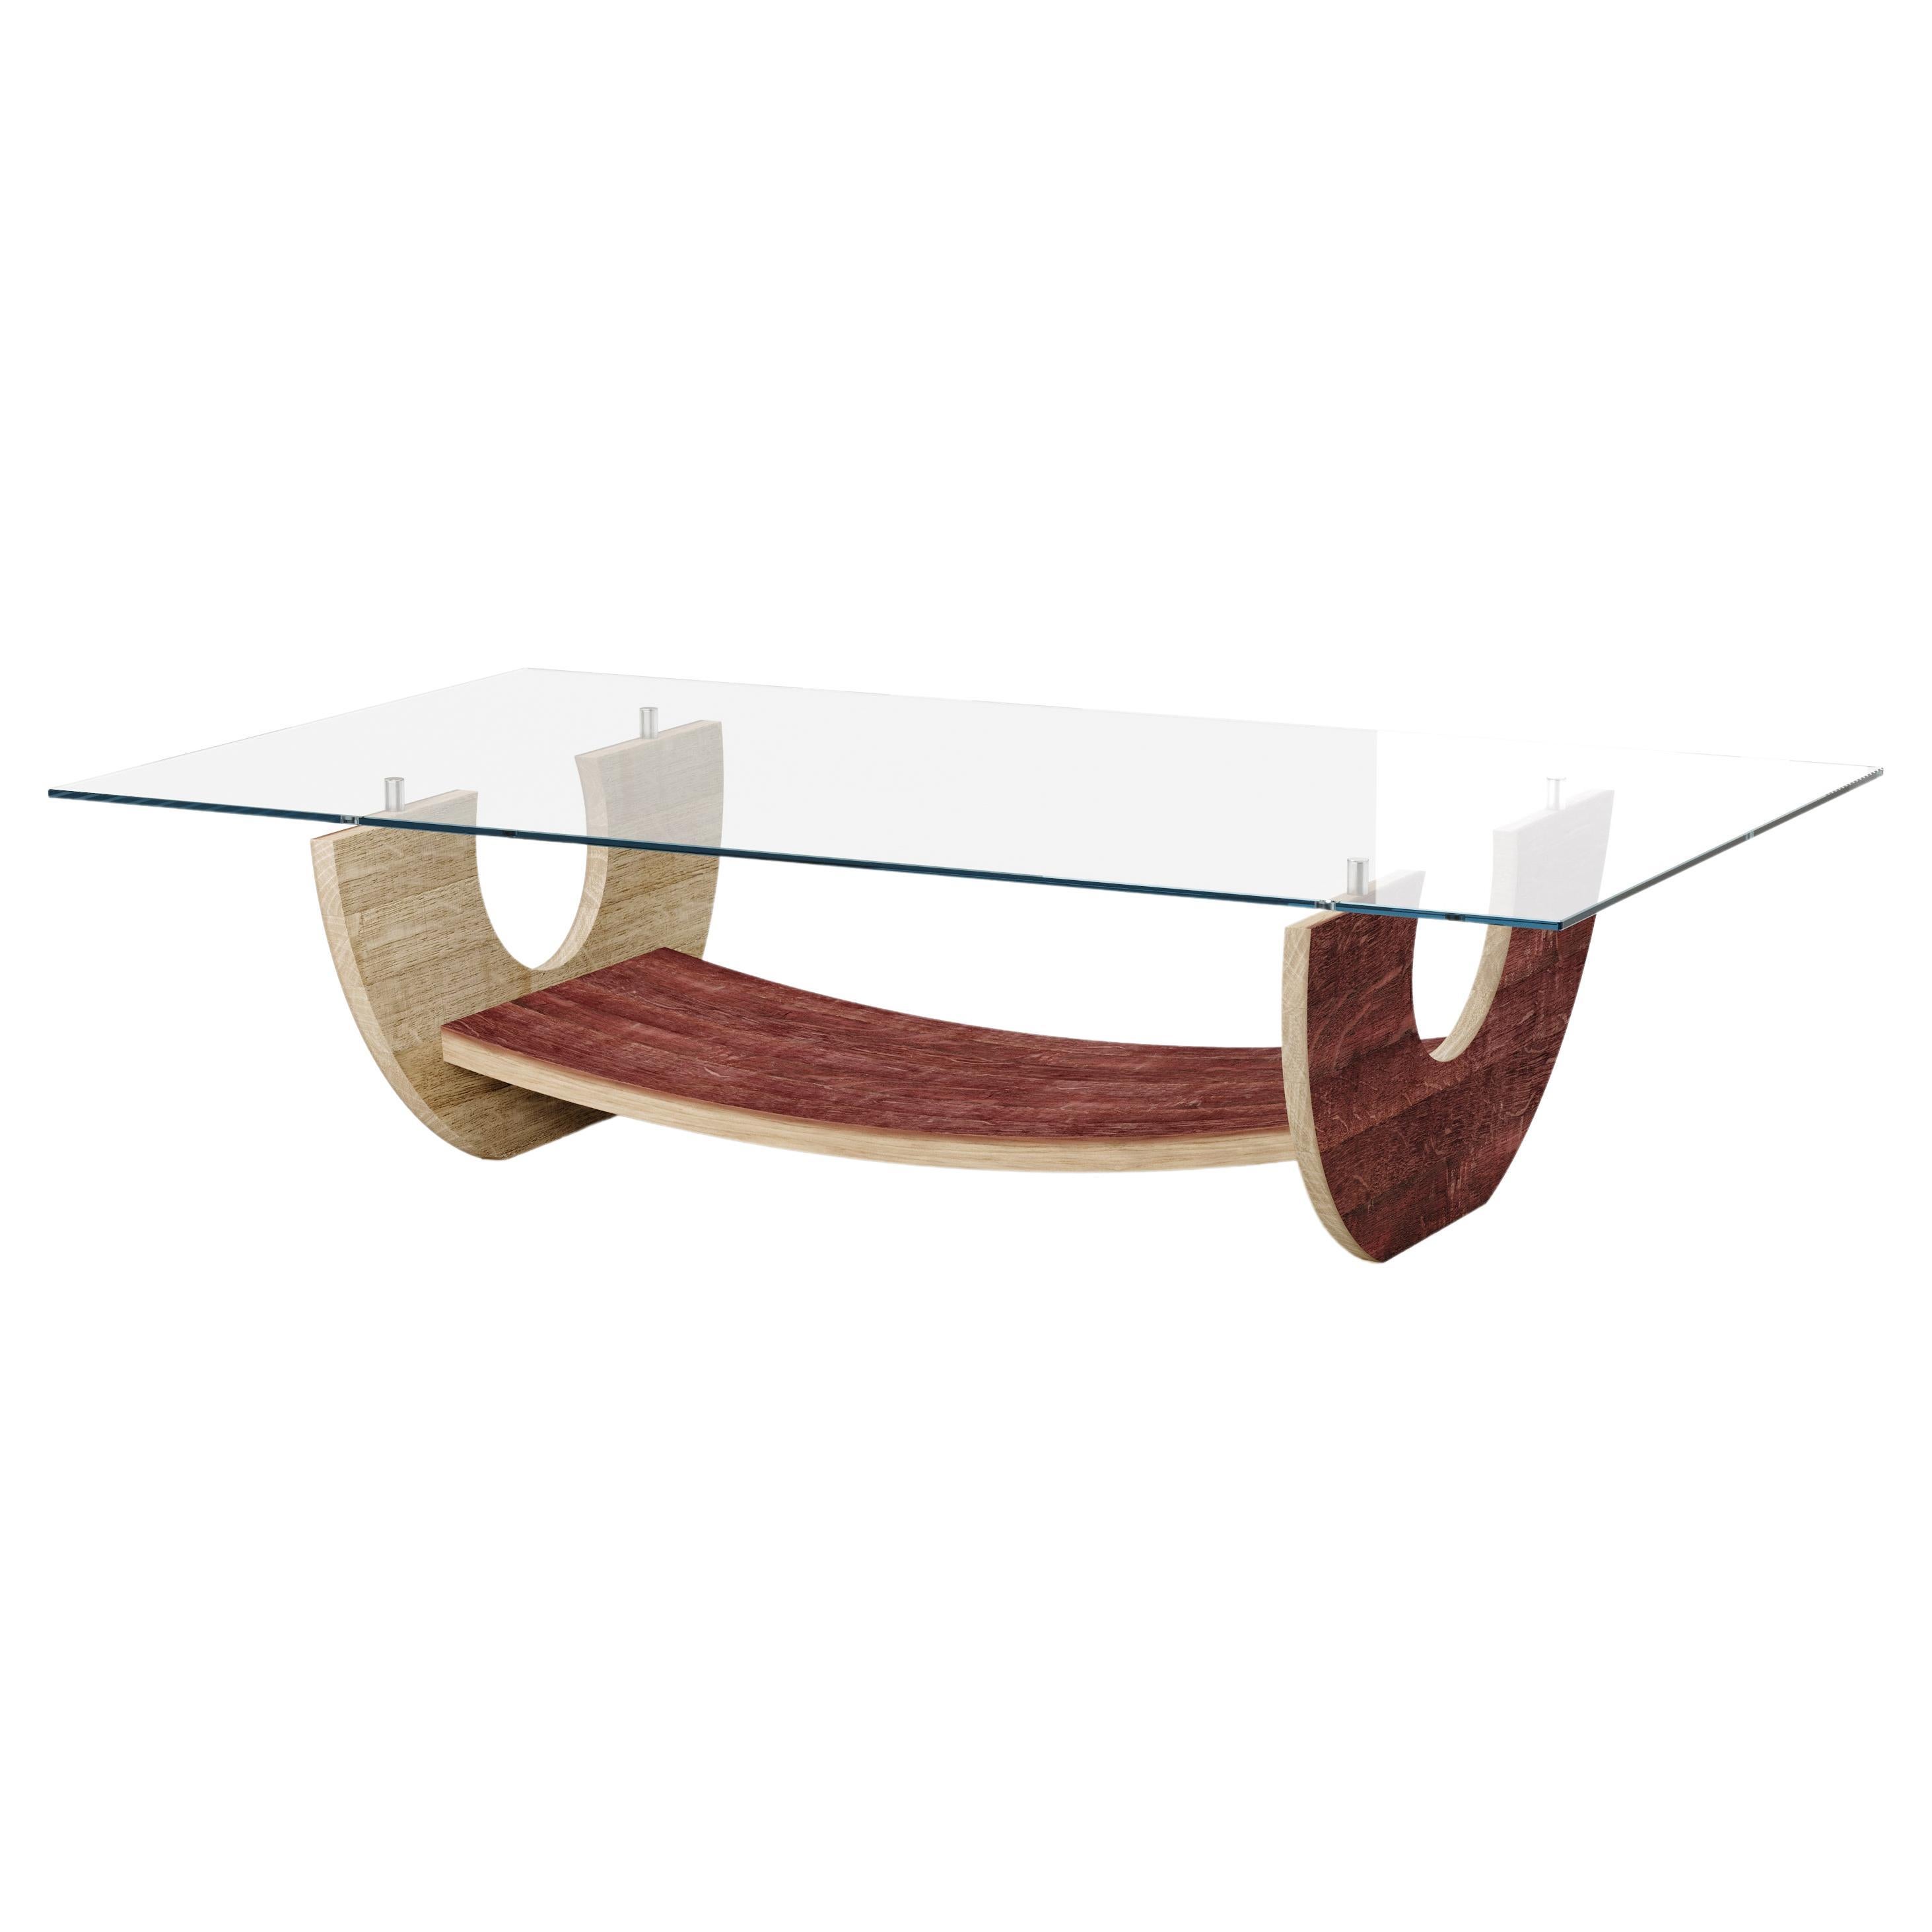 Trevi coffee table by Winetage handmade in Italy